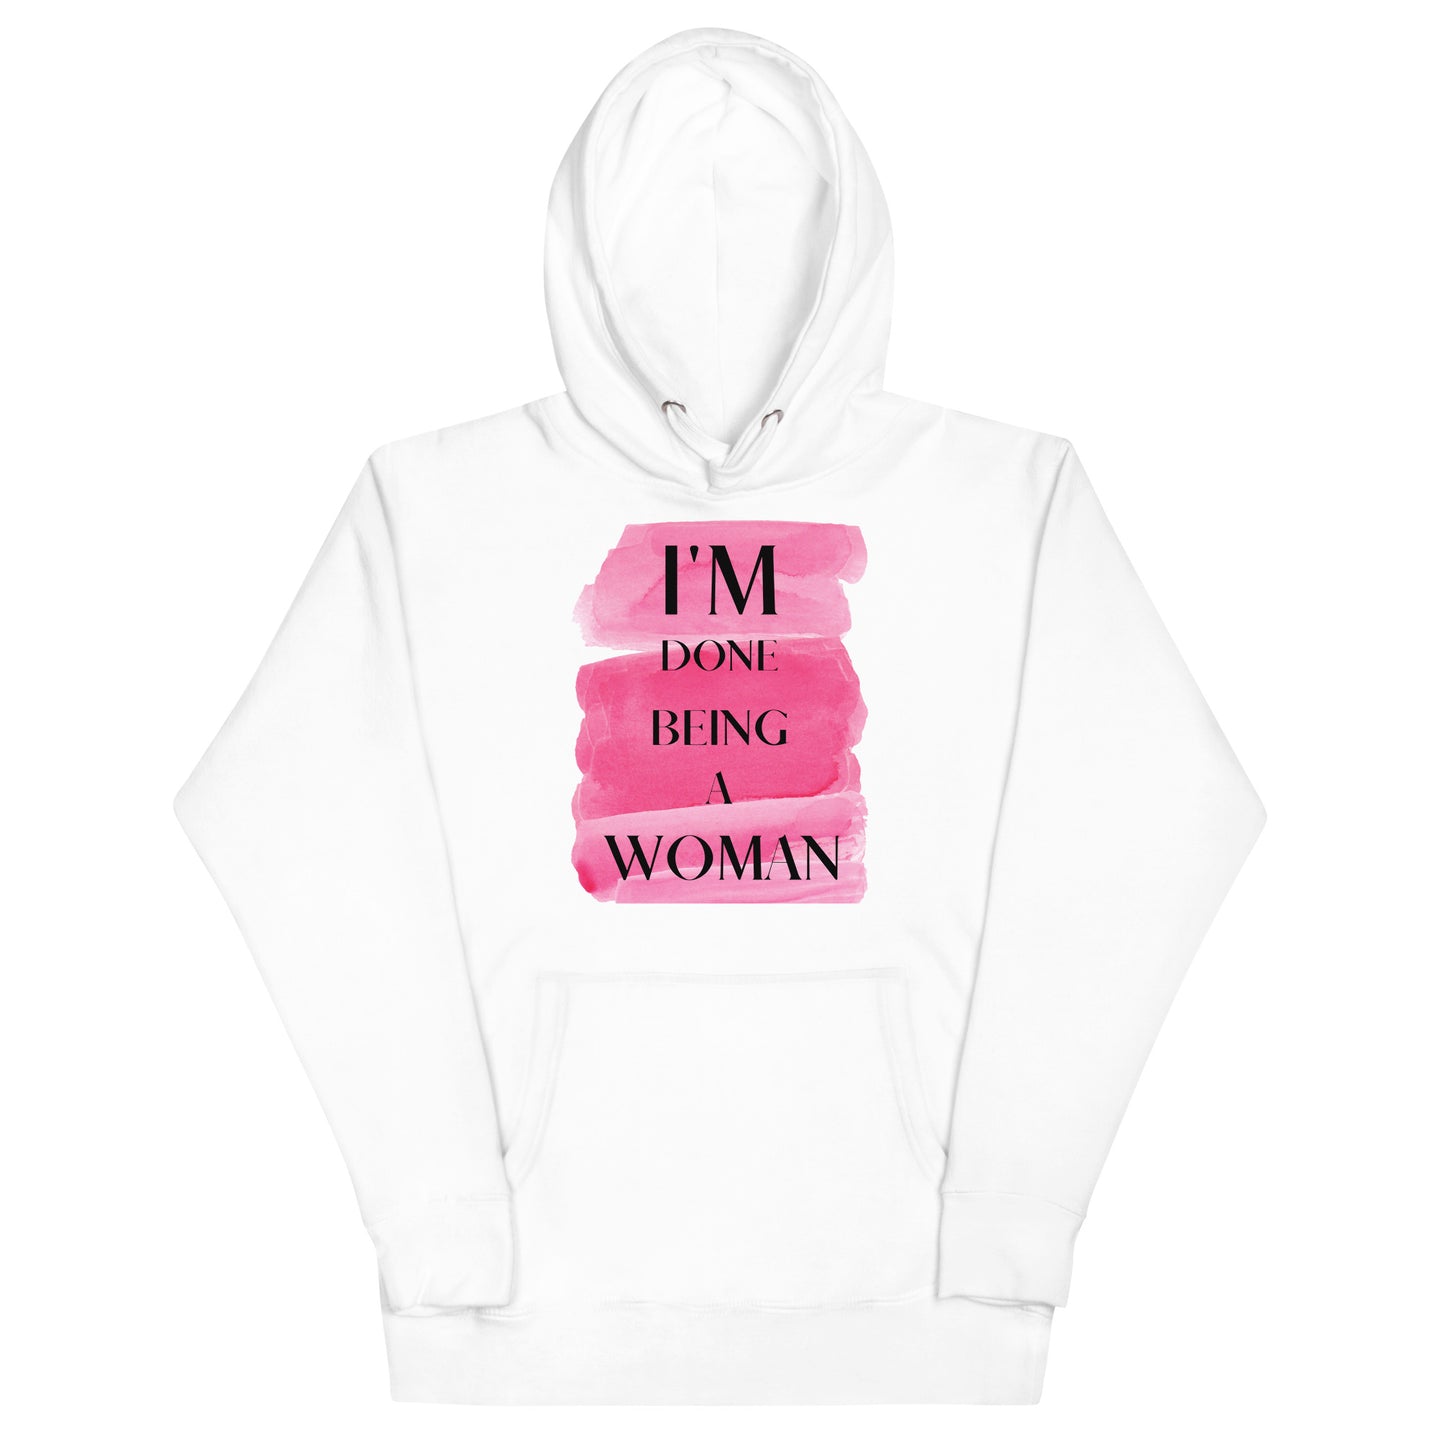 I'm Done Being A Woman Hoodie